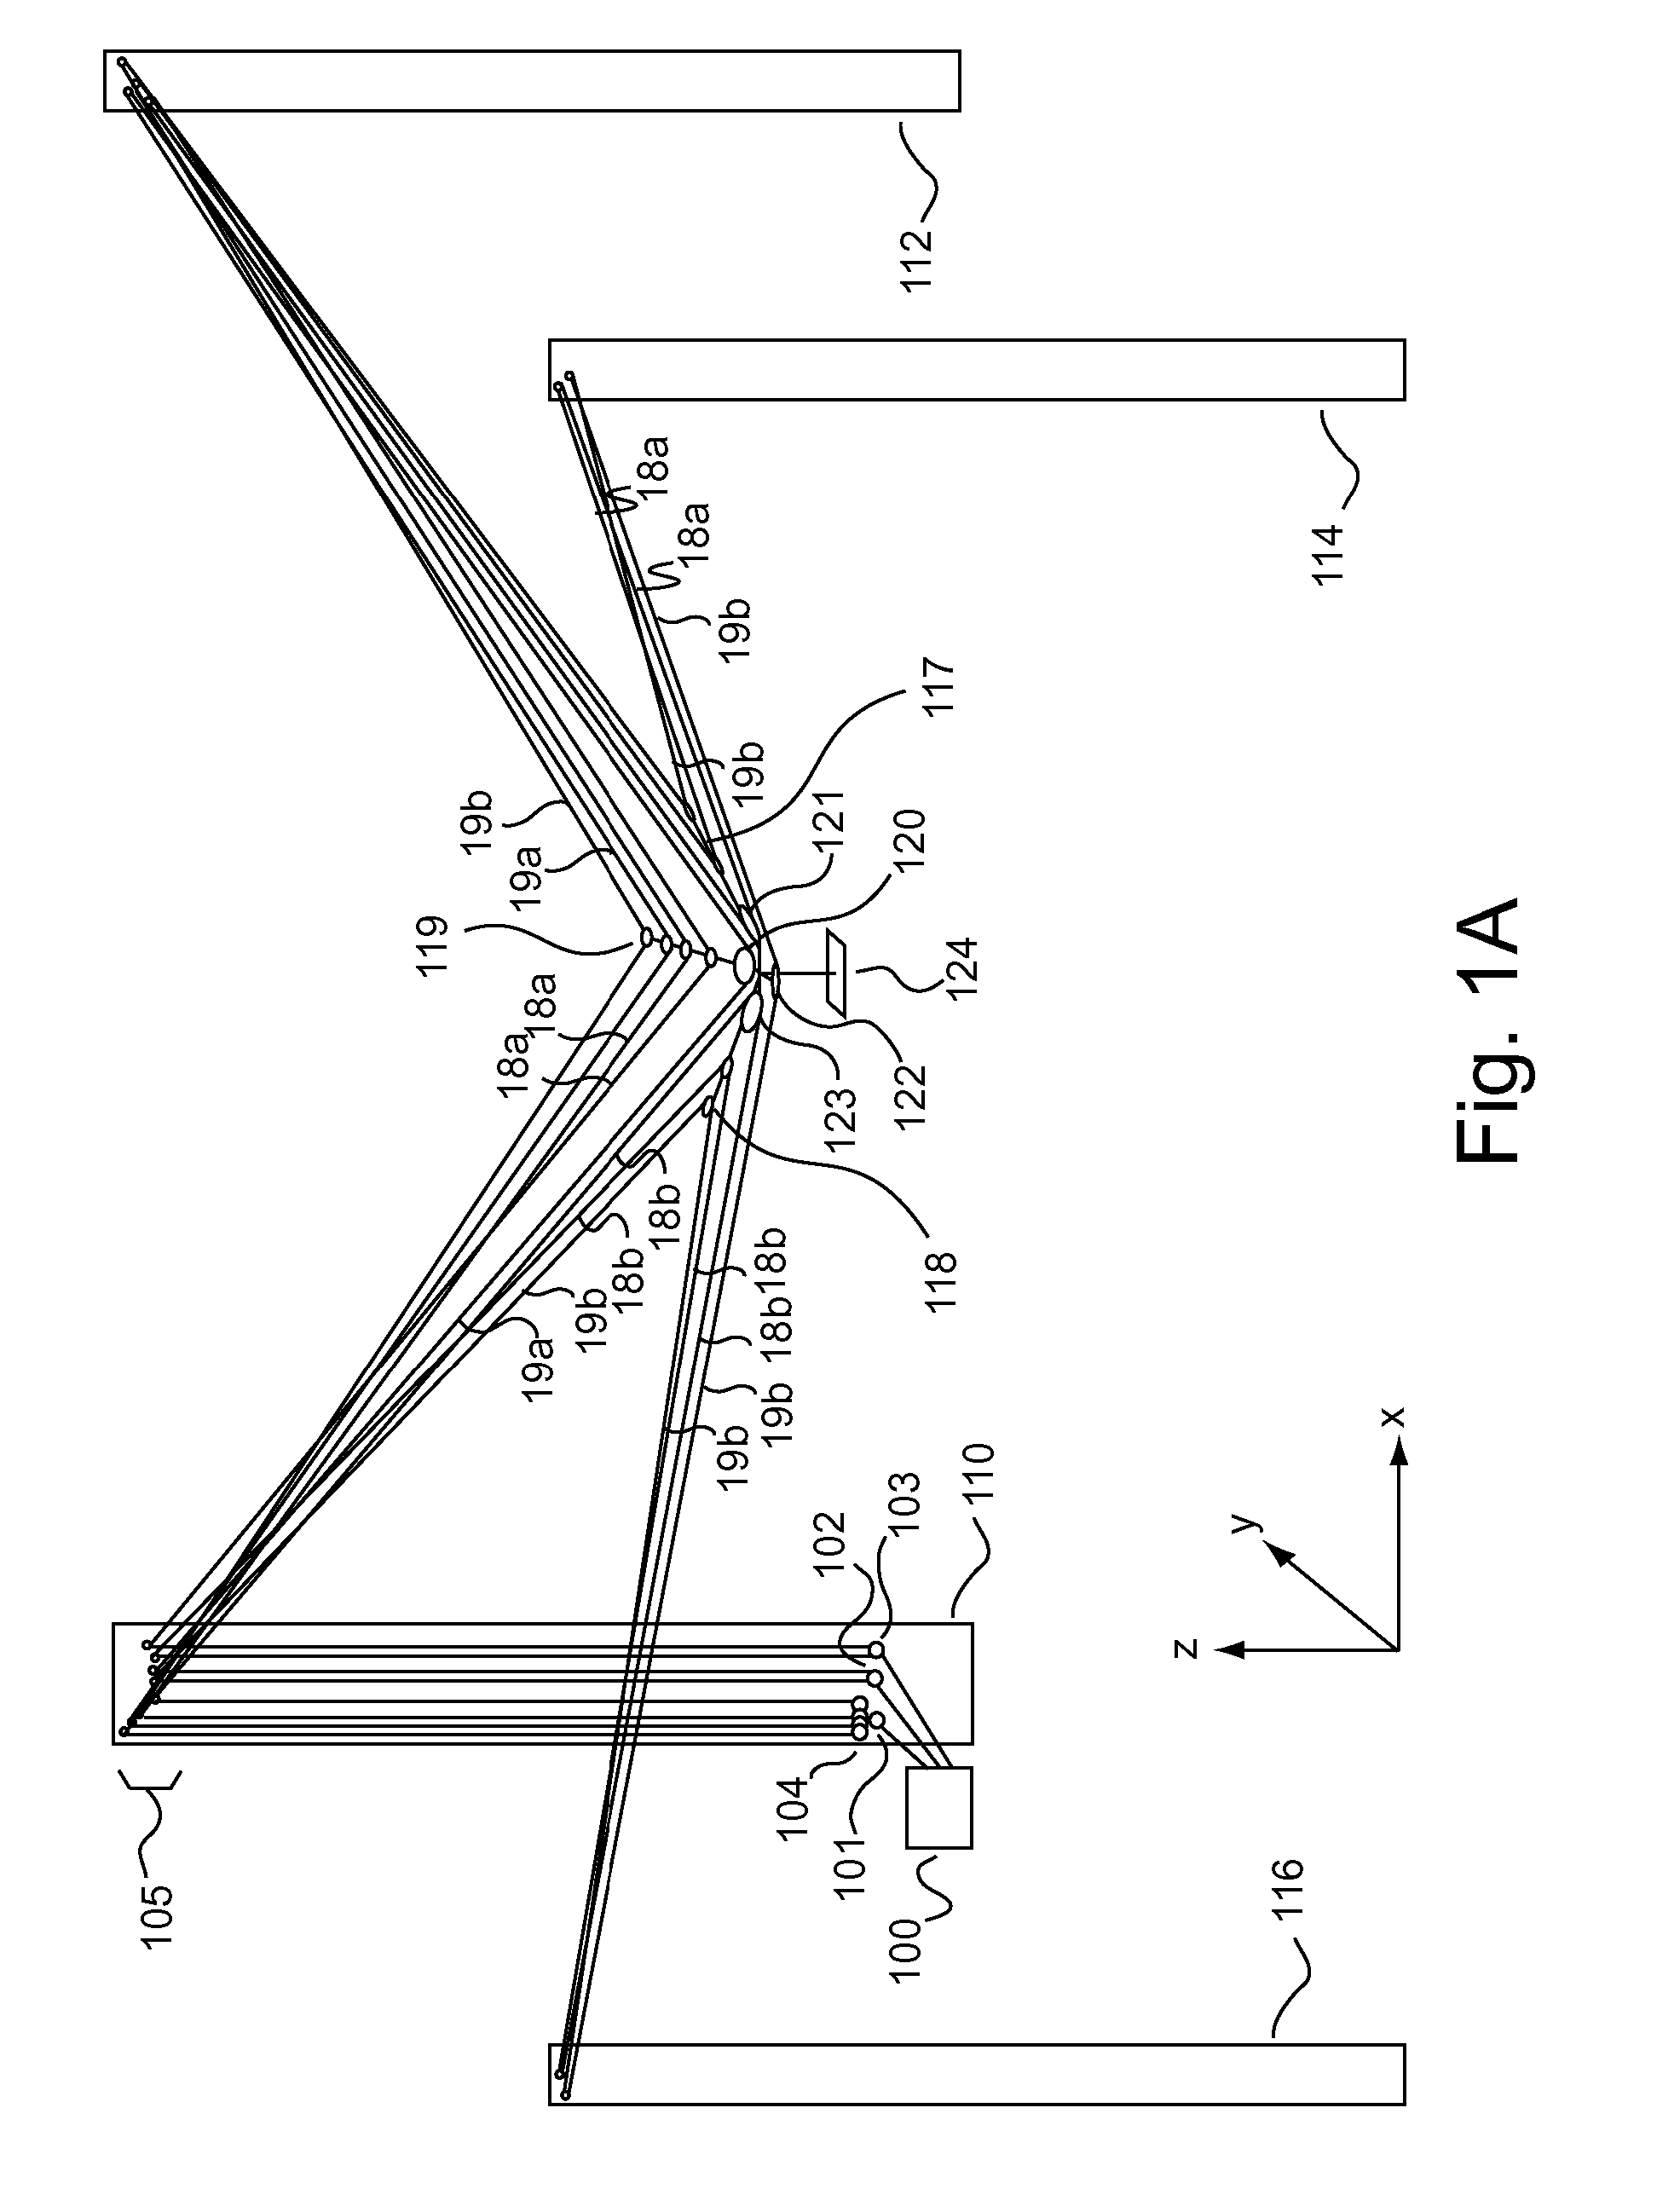 System and method for facilitating fluid three-dimensional movement of an object via directional force